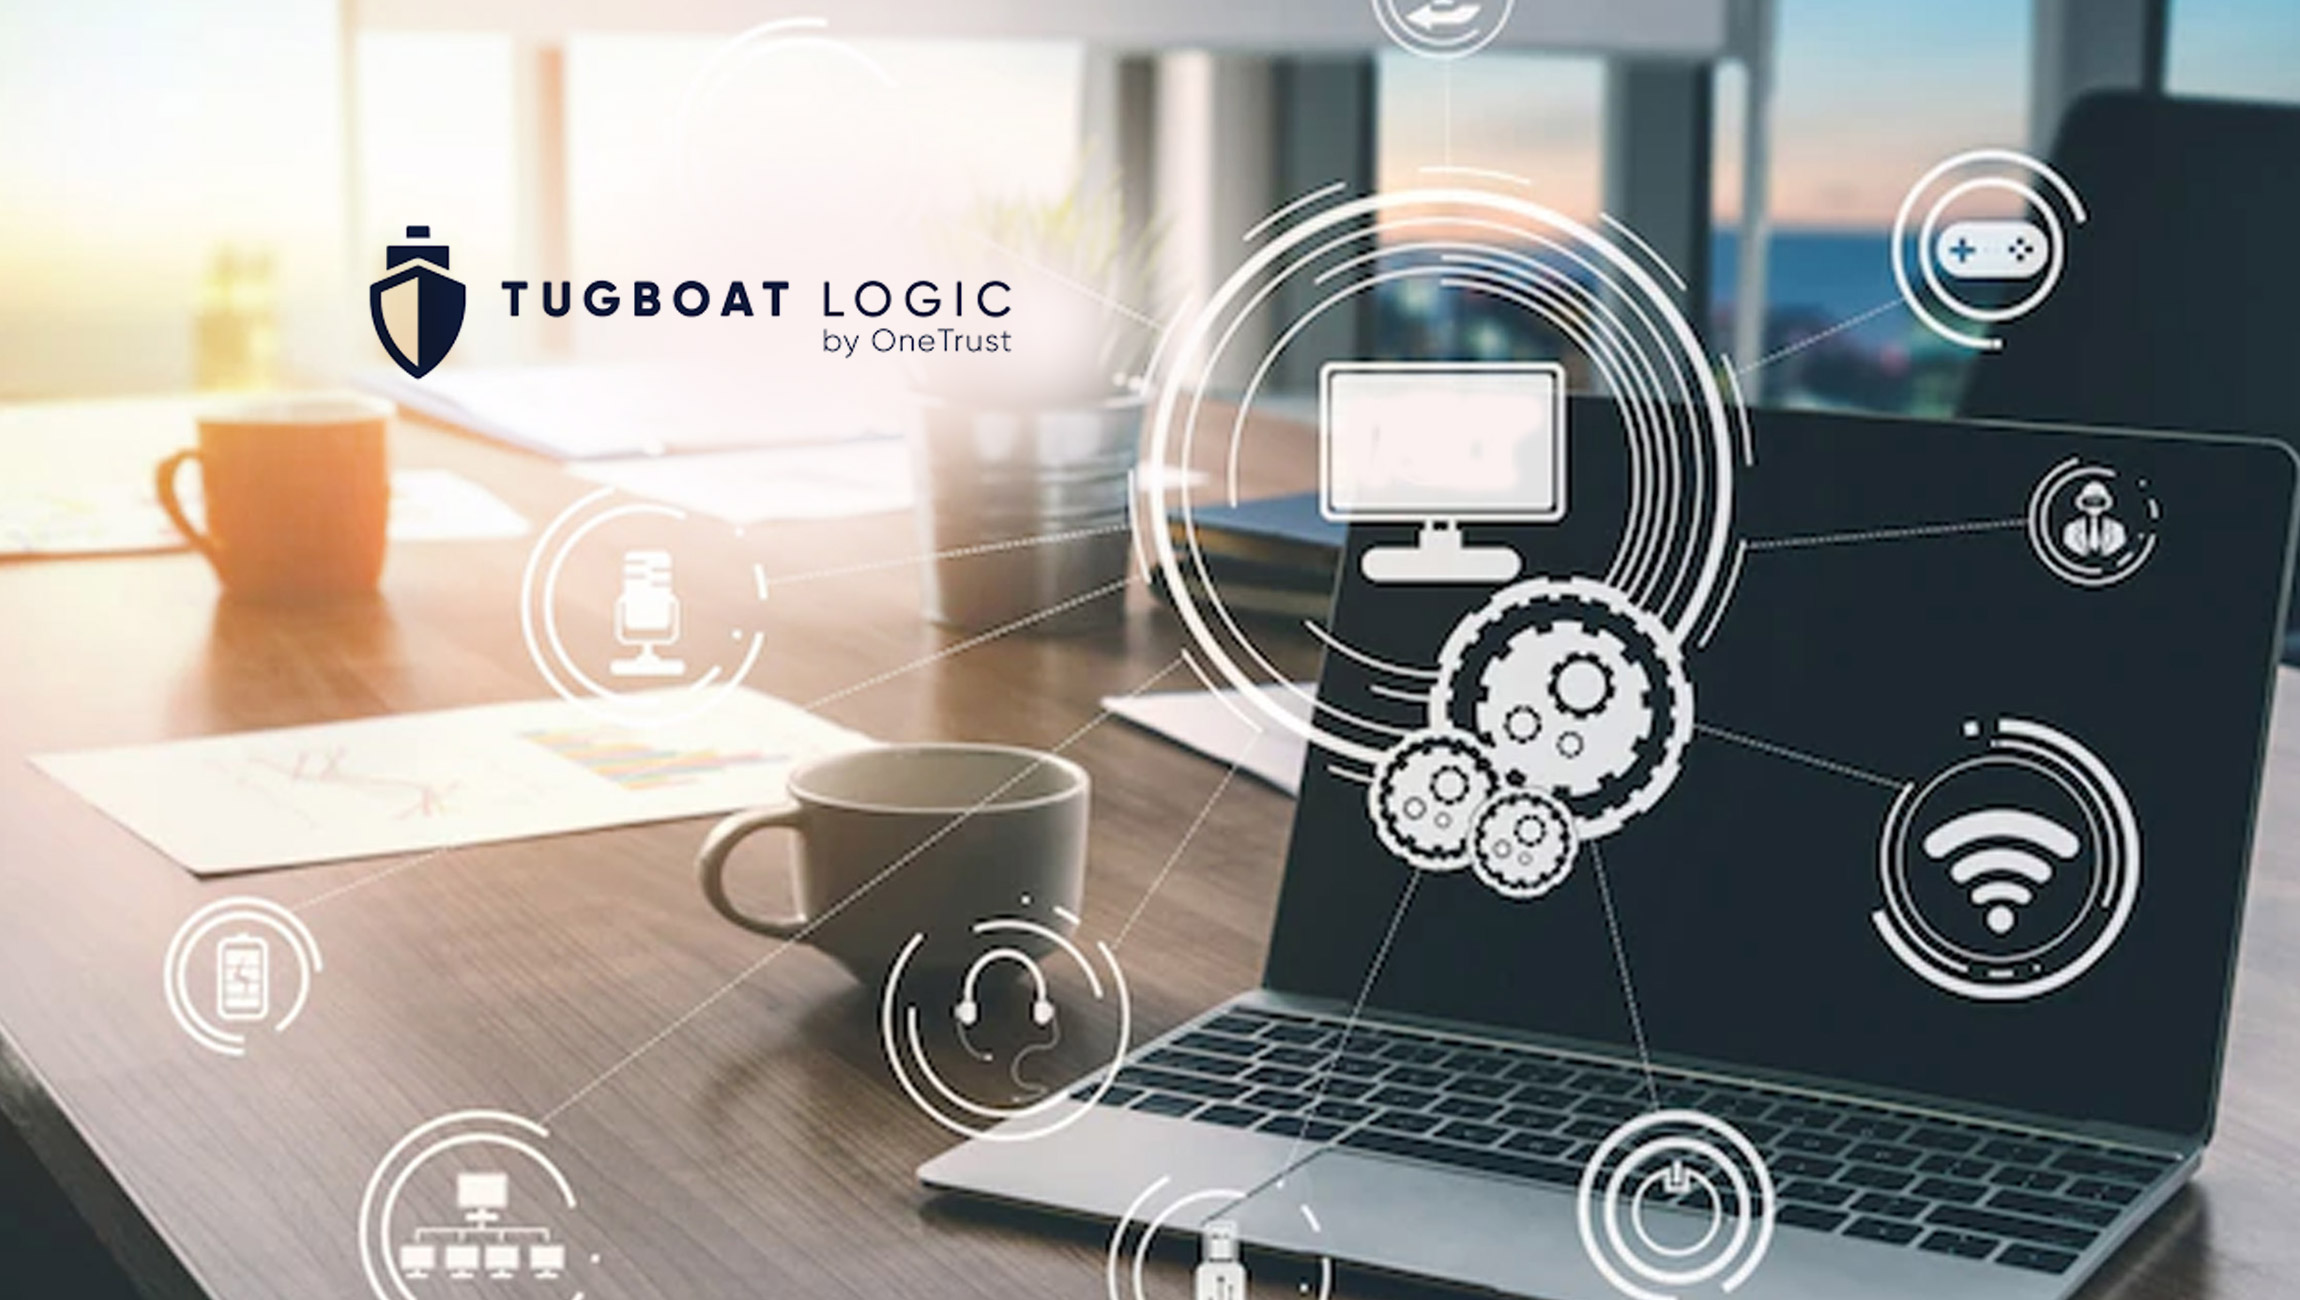 Tugboat Logic Receives Patent for InfoSec Certification Automation in a SaaS Platform 1